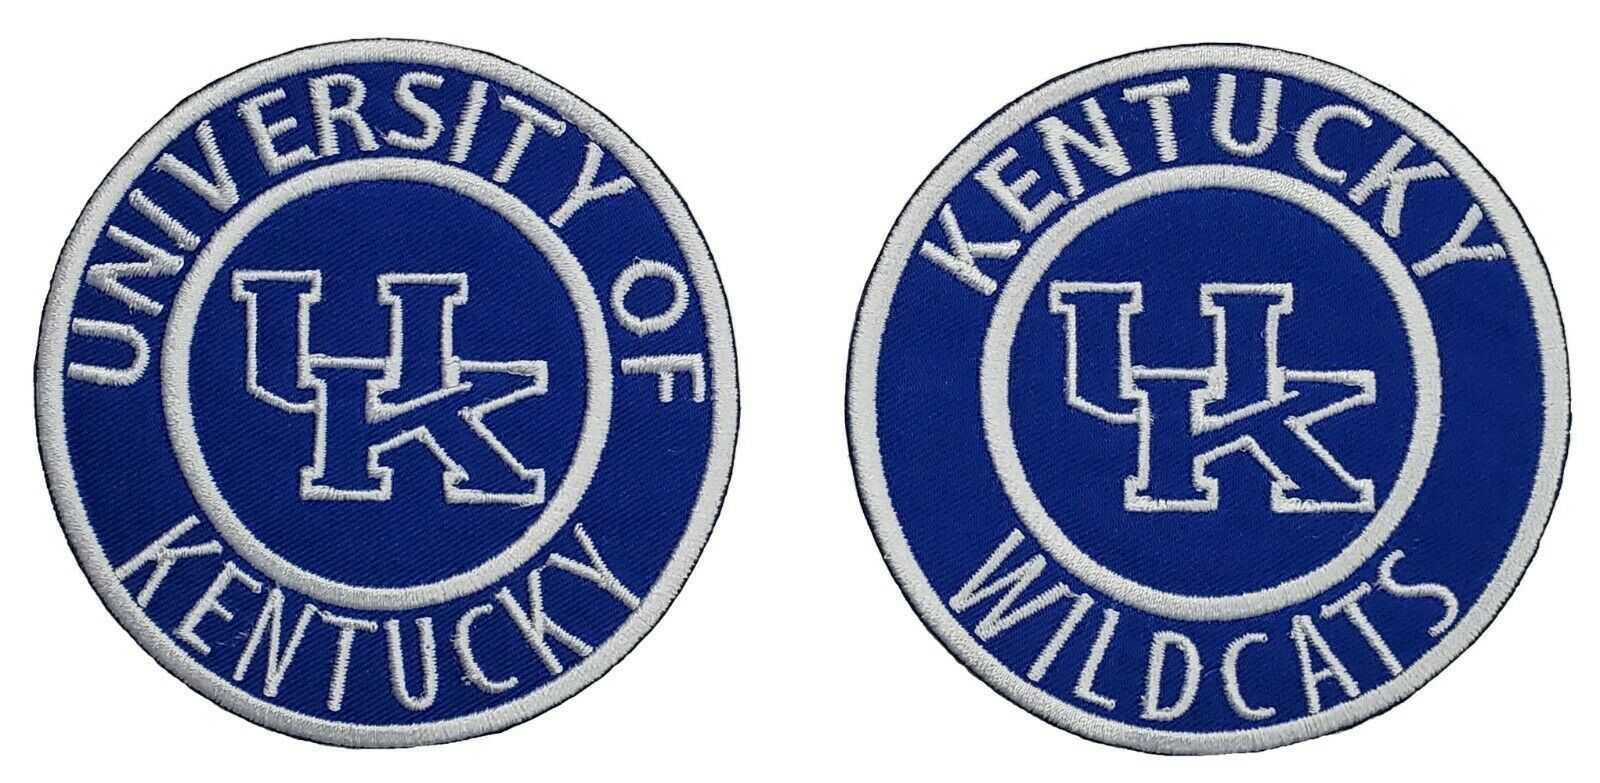 University of Kentucky Wildcats NCAA Football Embroidered Applique Iron On Patch - $8.49 - $10.48